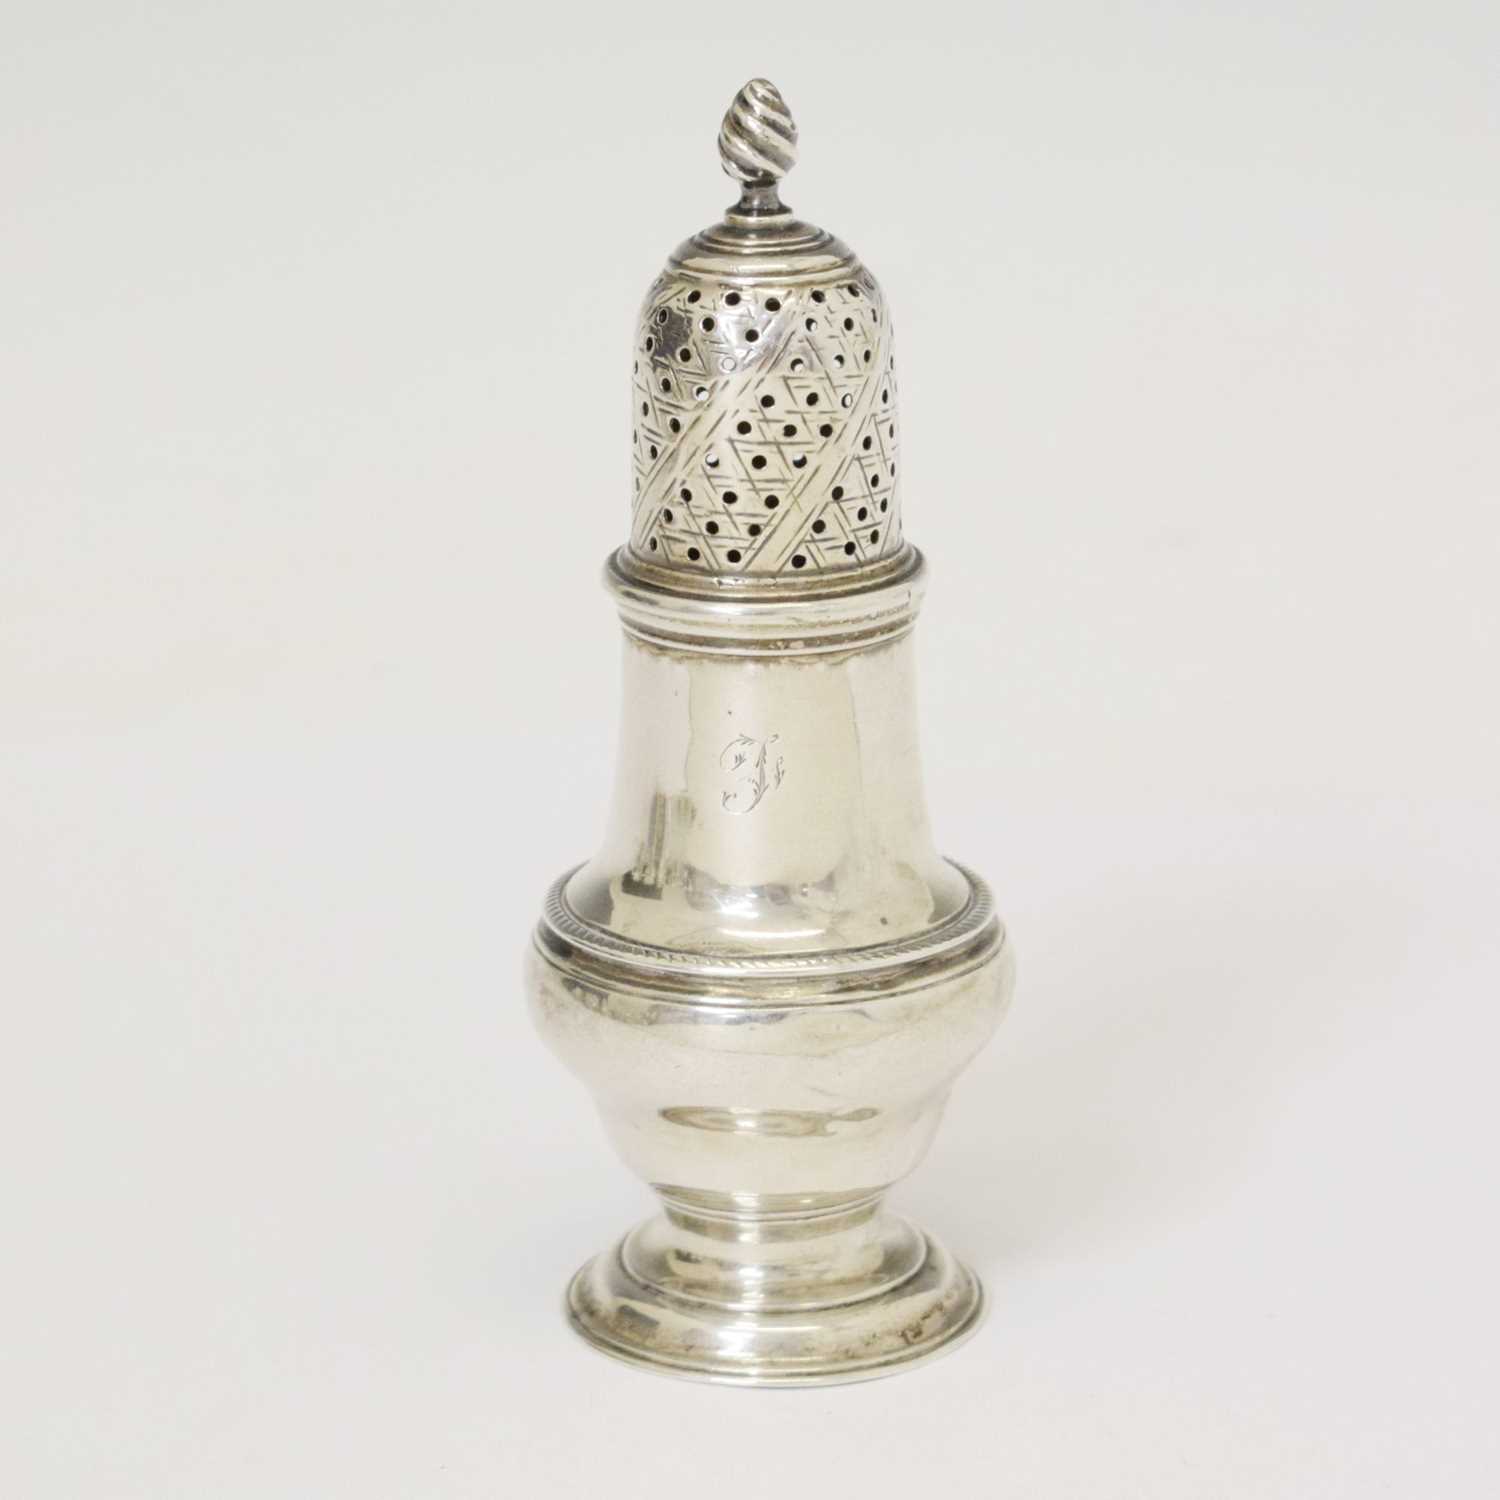 George III silver pepperette of baluster form